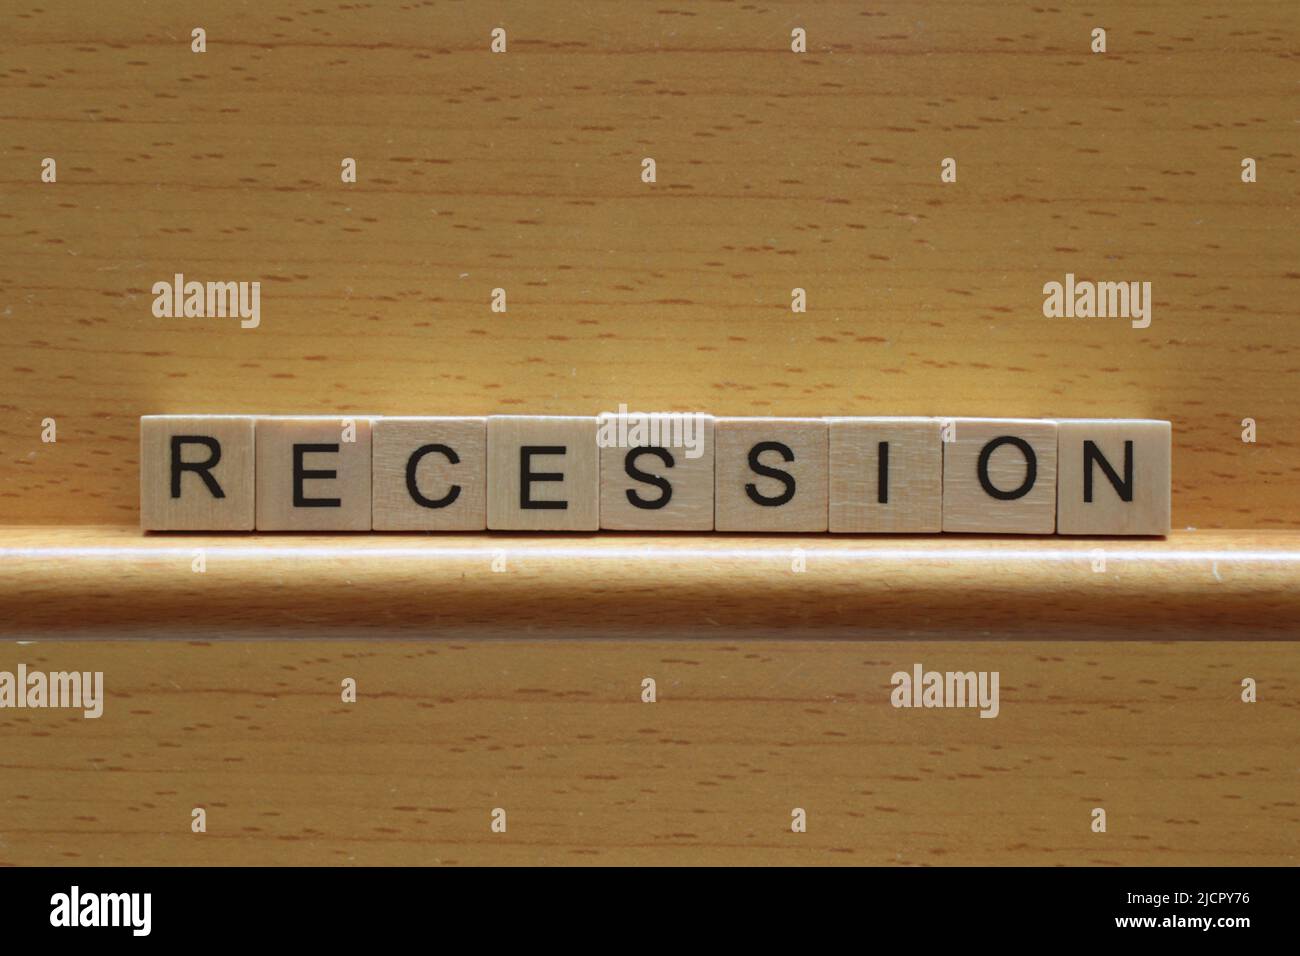 Recession concept, the word recession in wooden blocks on a wooden background with copy space Stock Photo